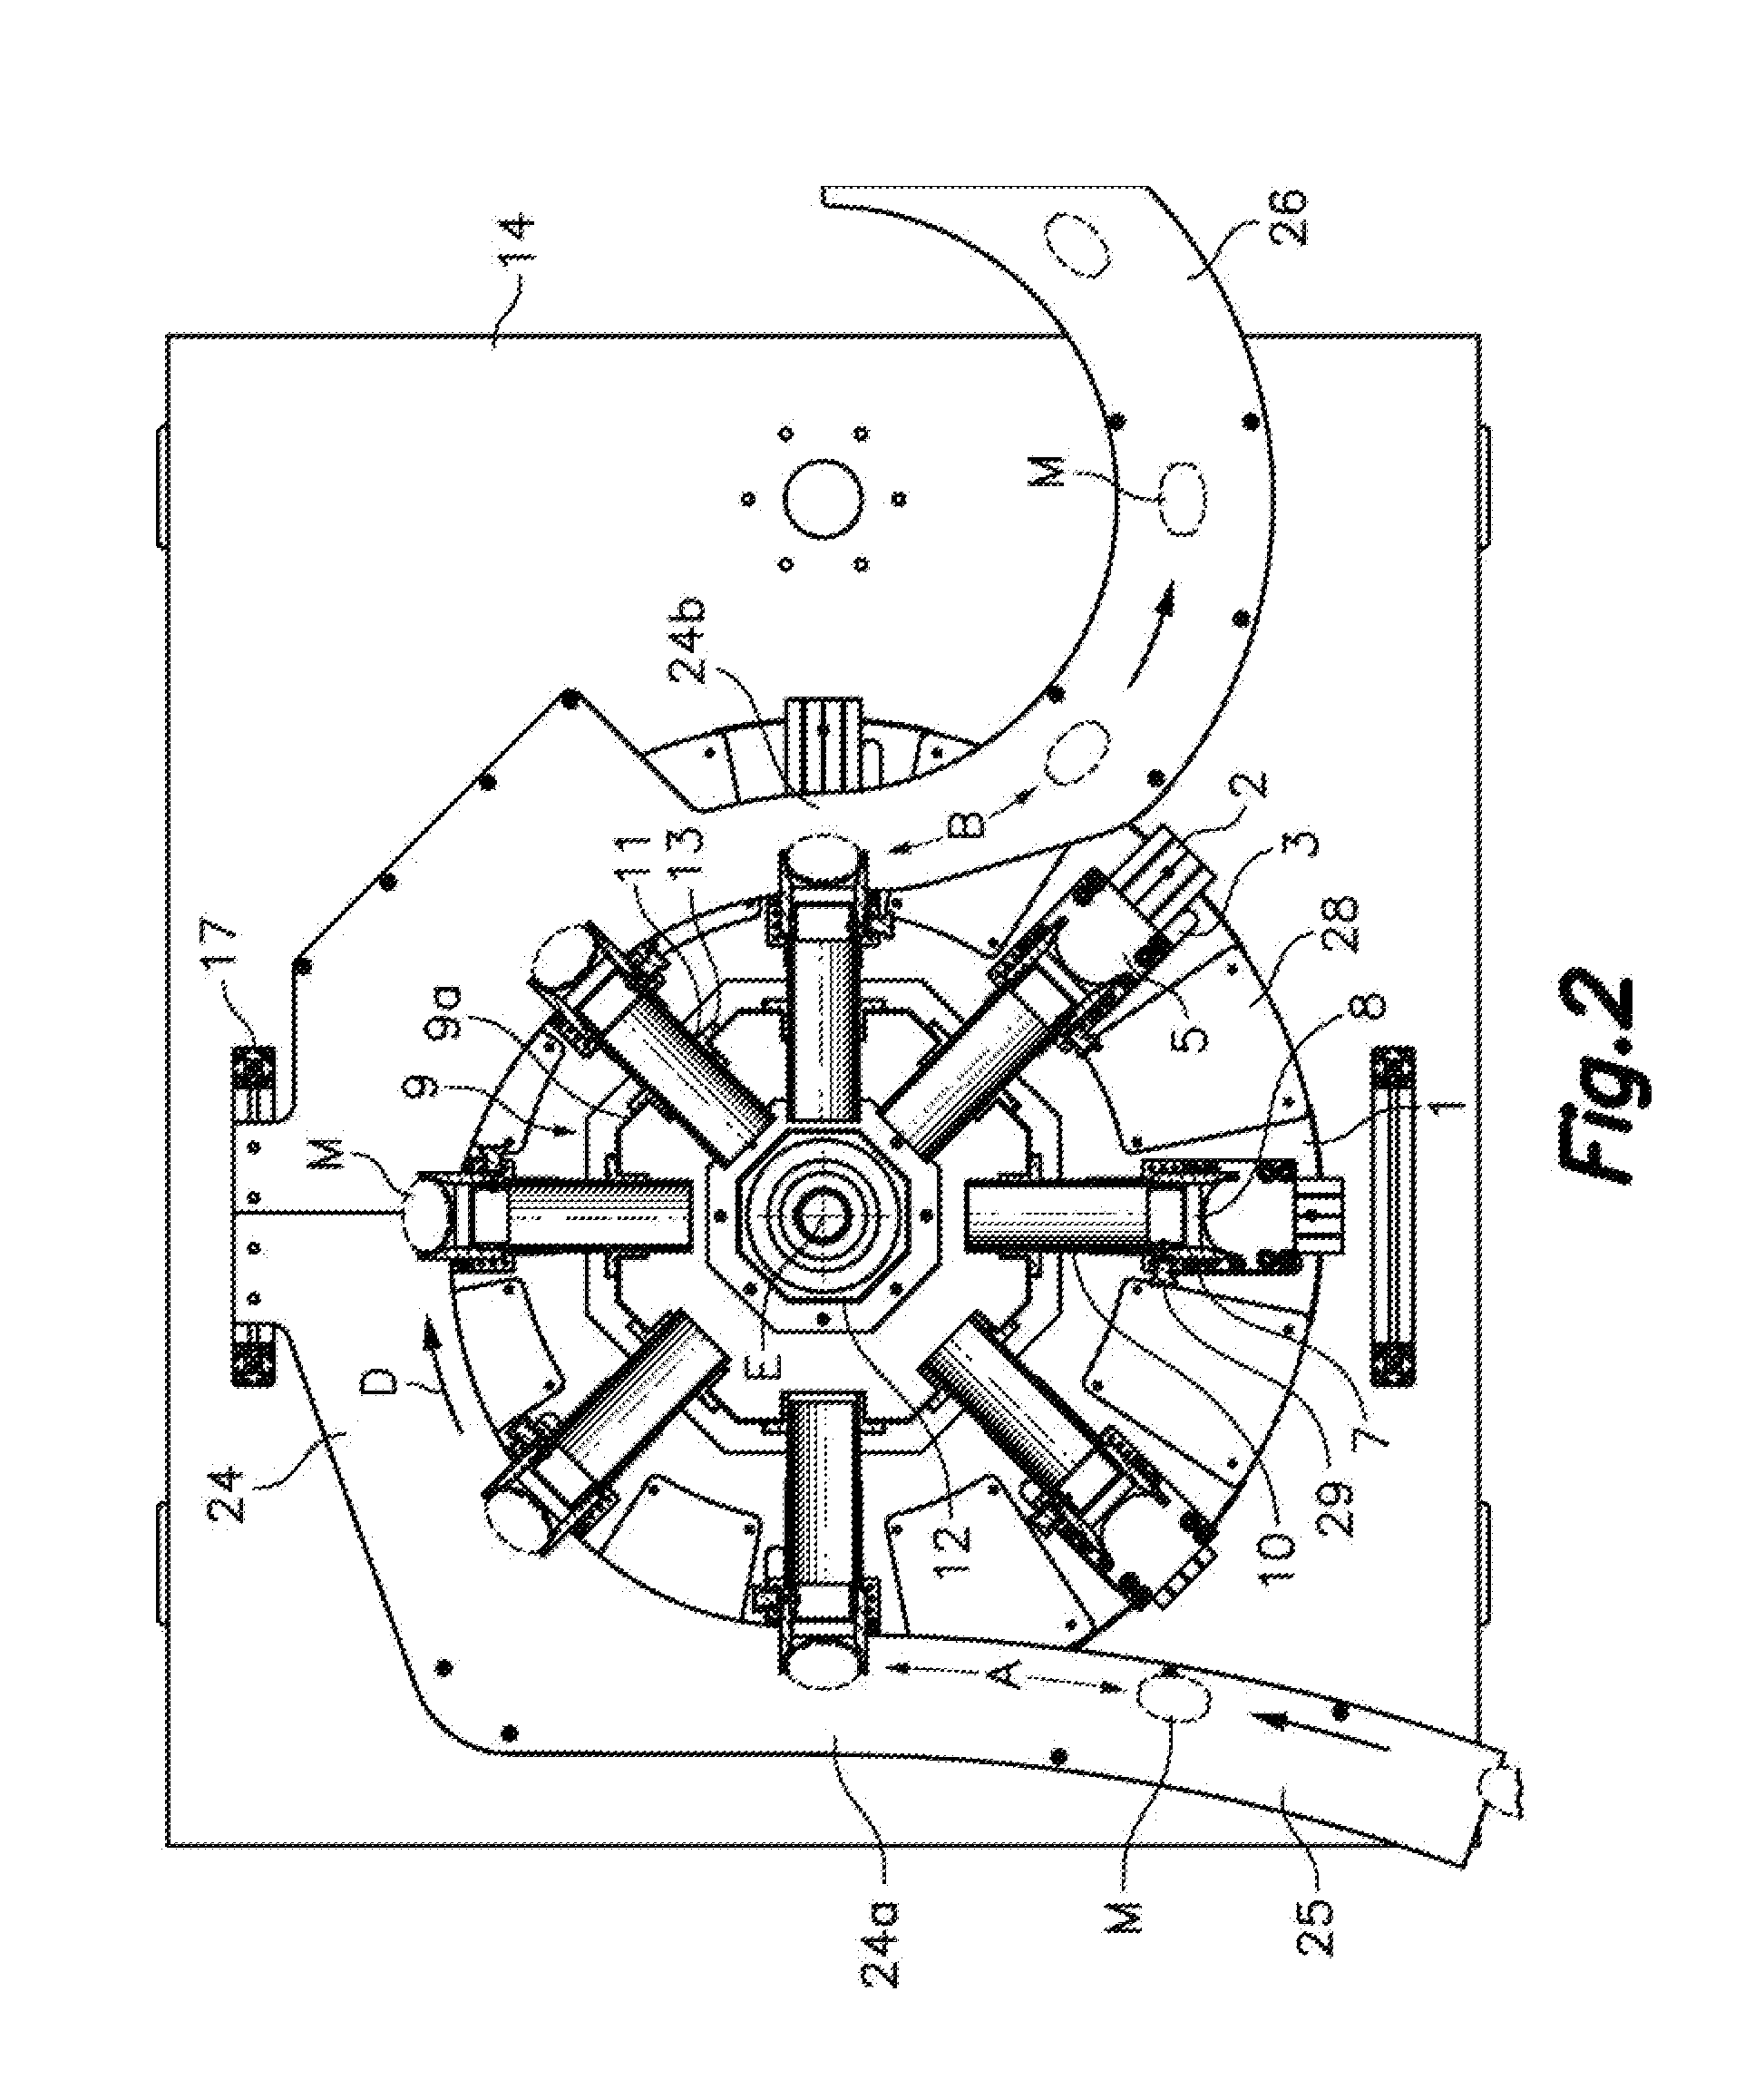 Rotary Conveyor with Change of Pitch for Transferring Containers